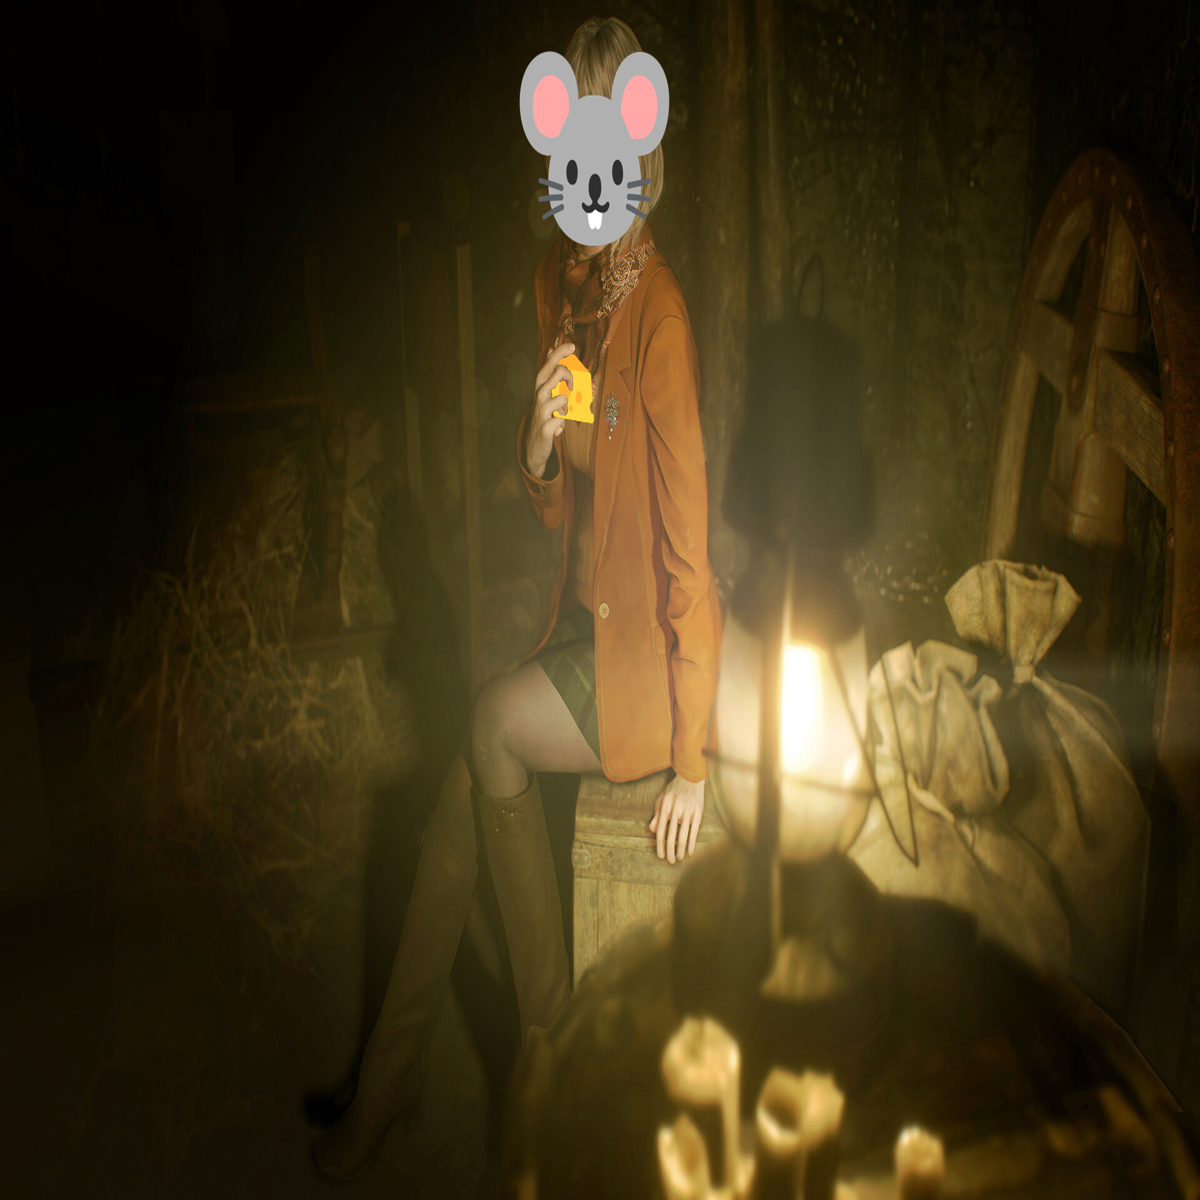 Resident Evil 4' Mouse Ashley Meme Is a Heartwarming Callback to